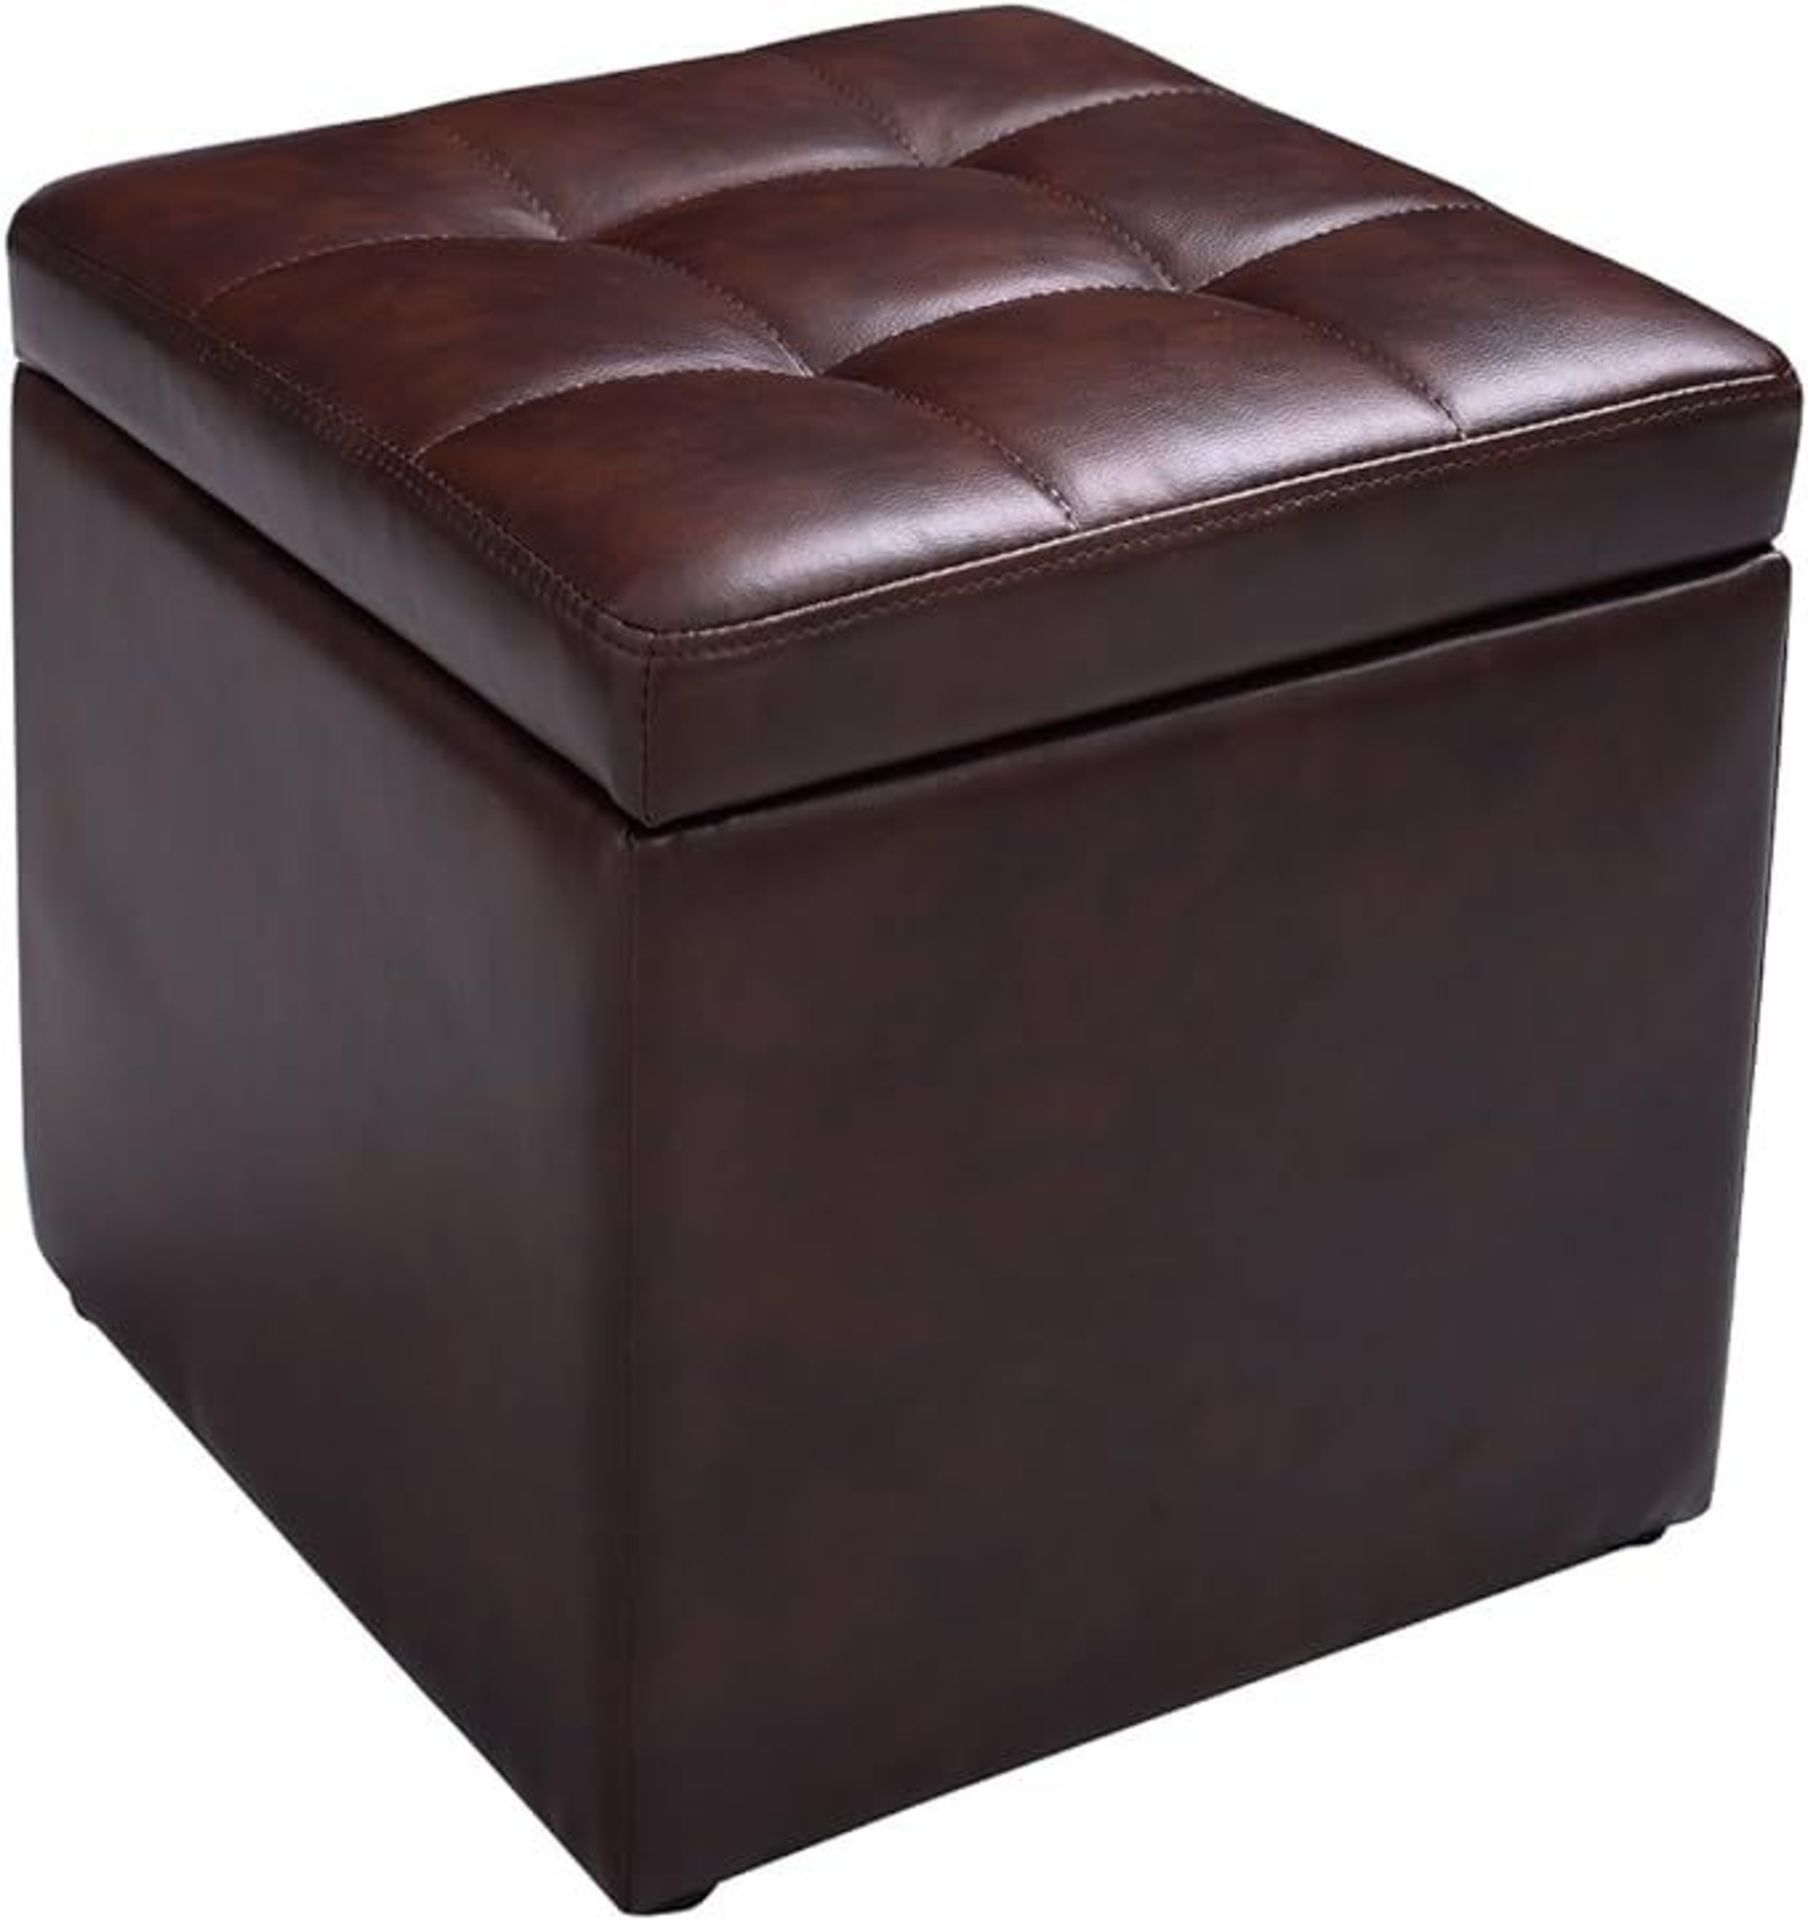 Luxury Faux Leather Ottoman, Pouffe Storage Toy Box with Hinge Top | Padded Foot Stool, Cube Bench